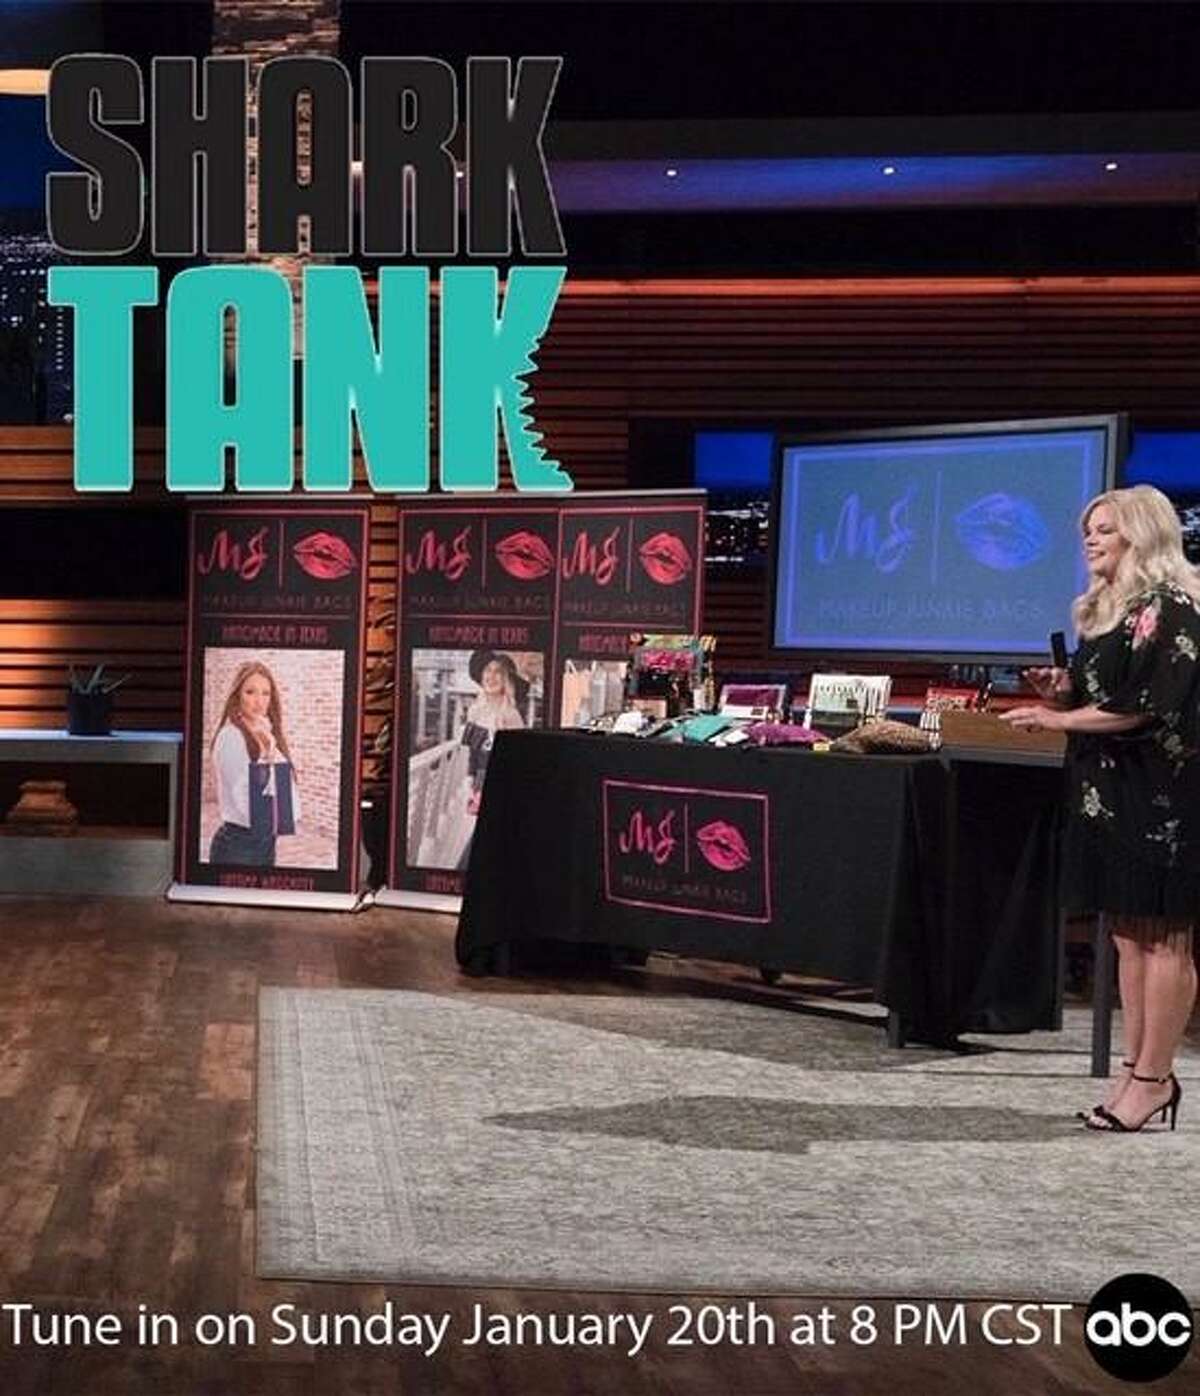 Montgomery County resident Meredith Jurica is pictured appearing on Shark Tank. Her episode airs on Sunday at 8 p.m. on ABC.